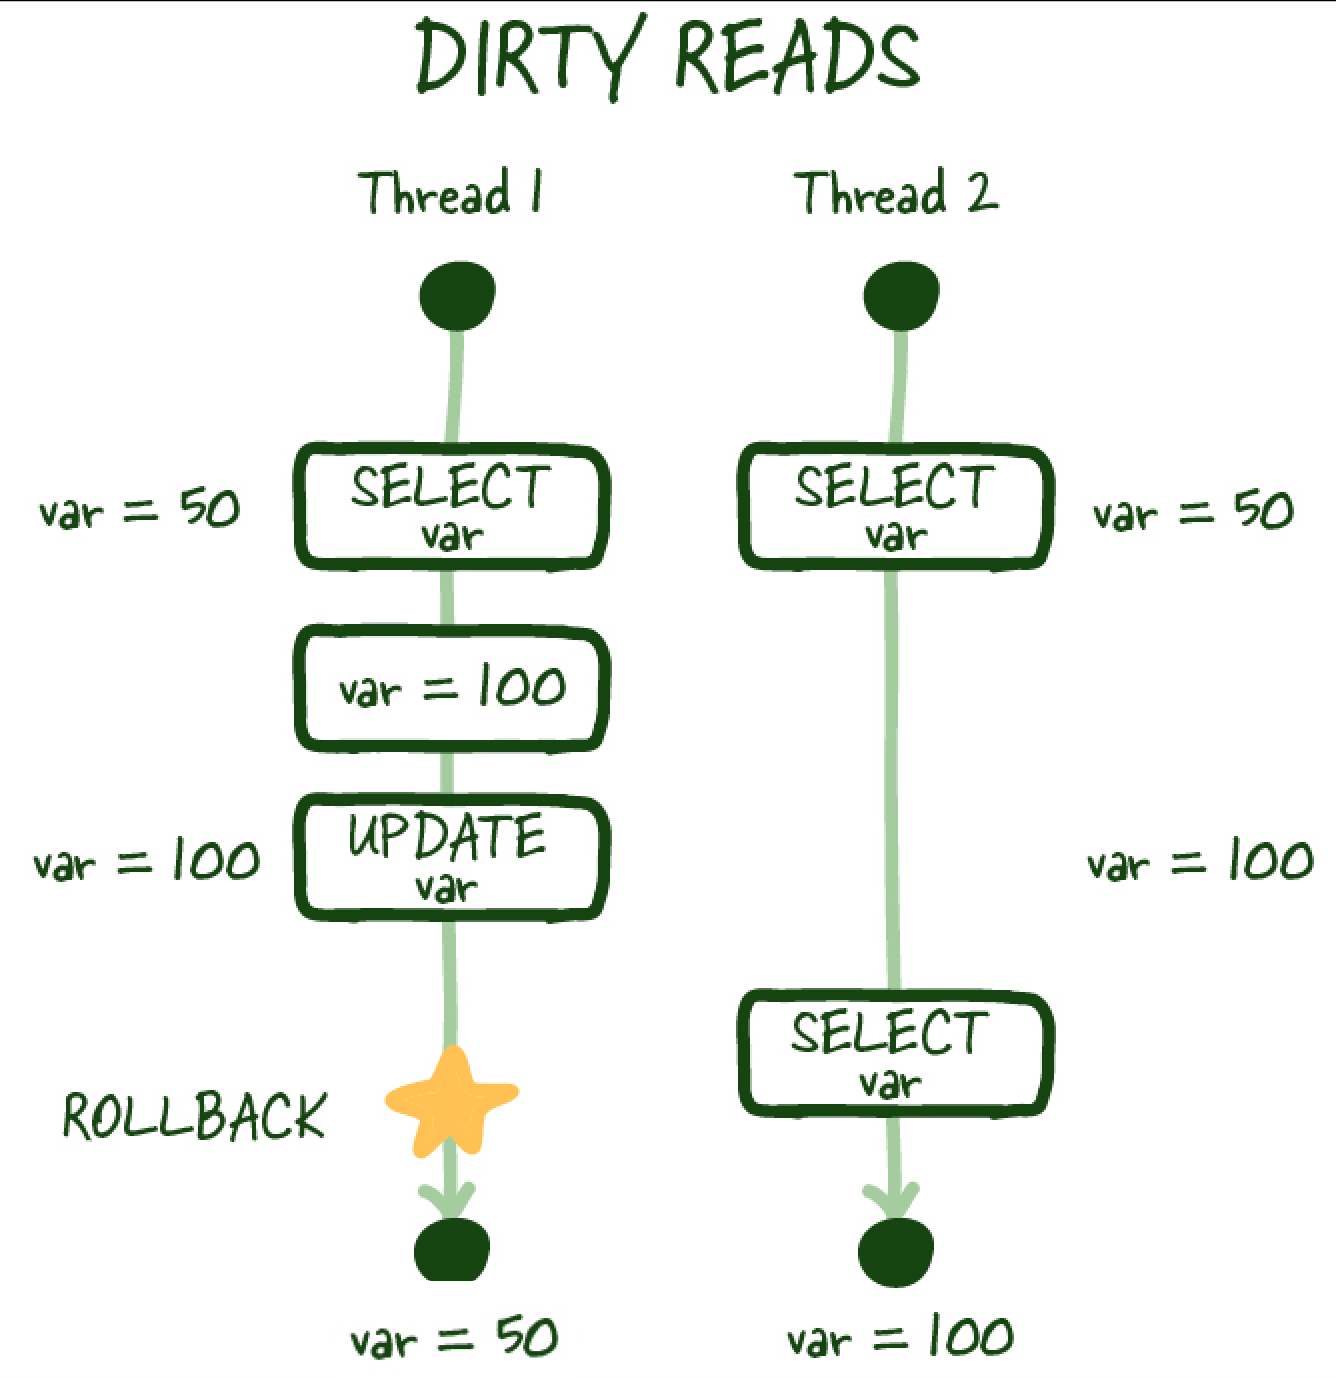 Dirty Reads architecturenotes.co